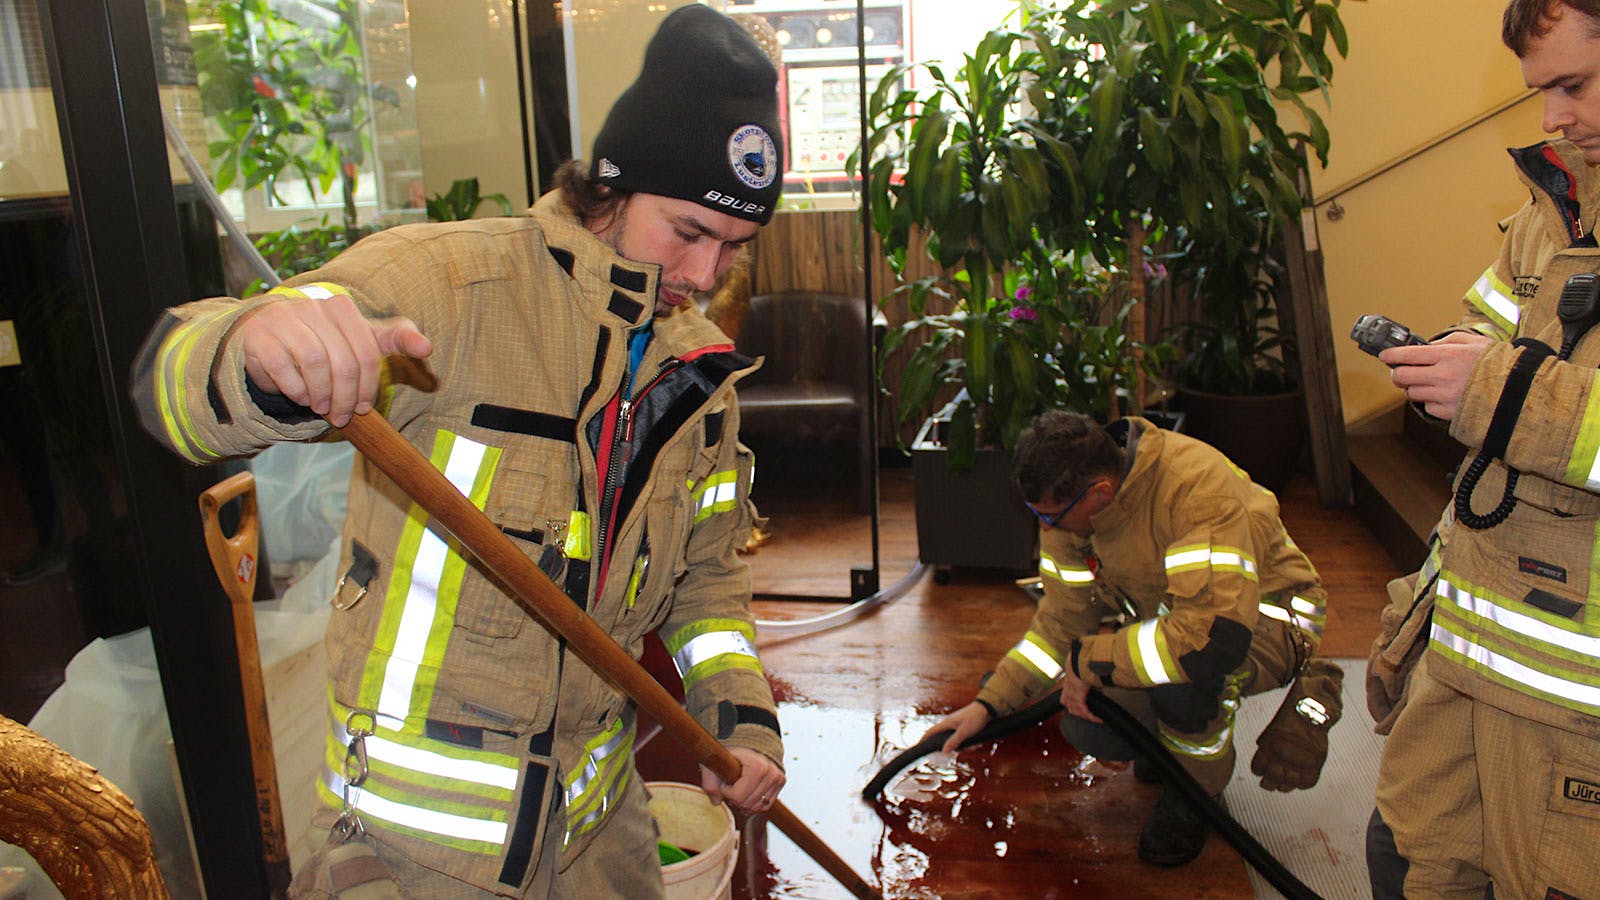 Firemen cleaning up wine spill